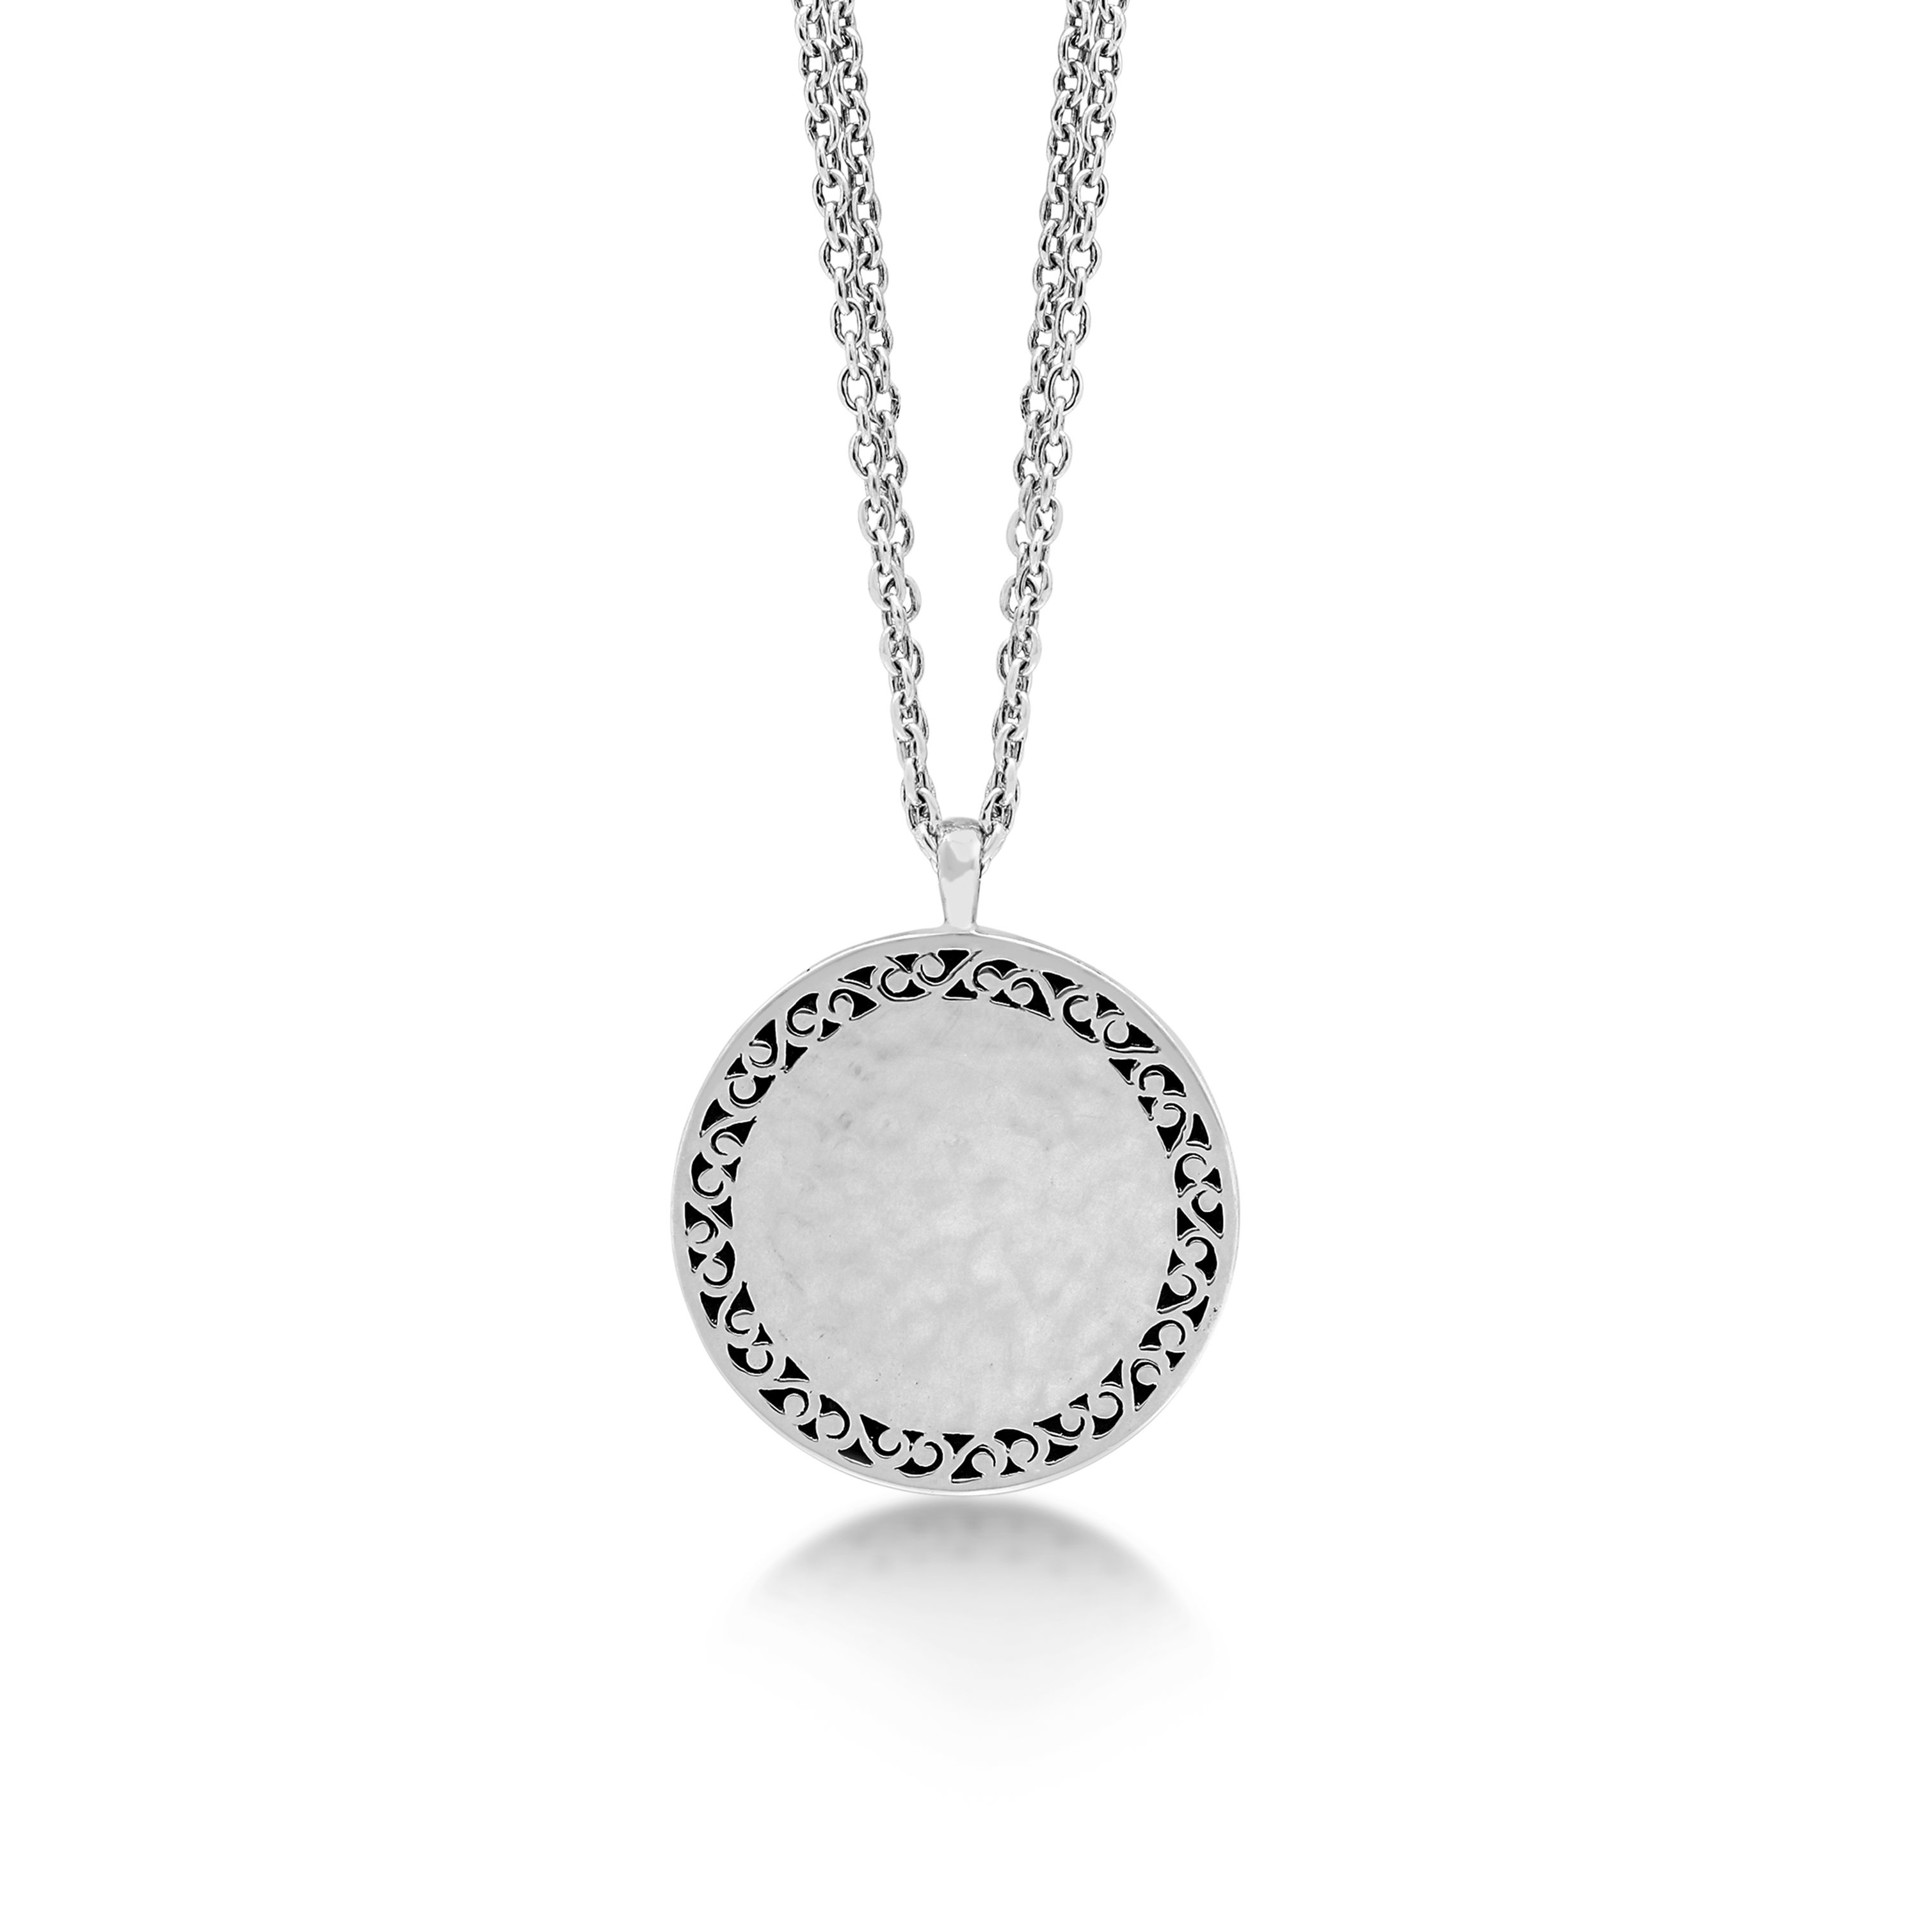 6992  Sterling Silver Circle Pendent Necklace by Lois Hill